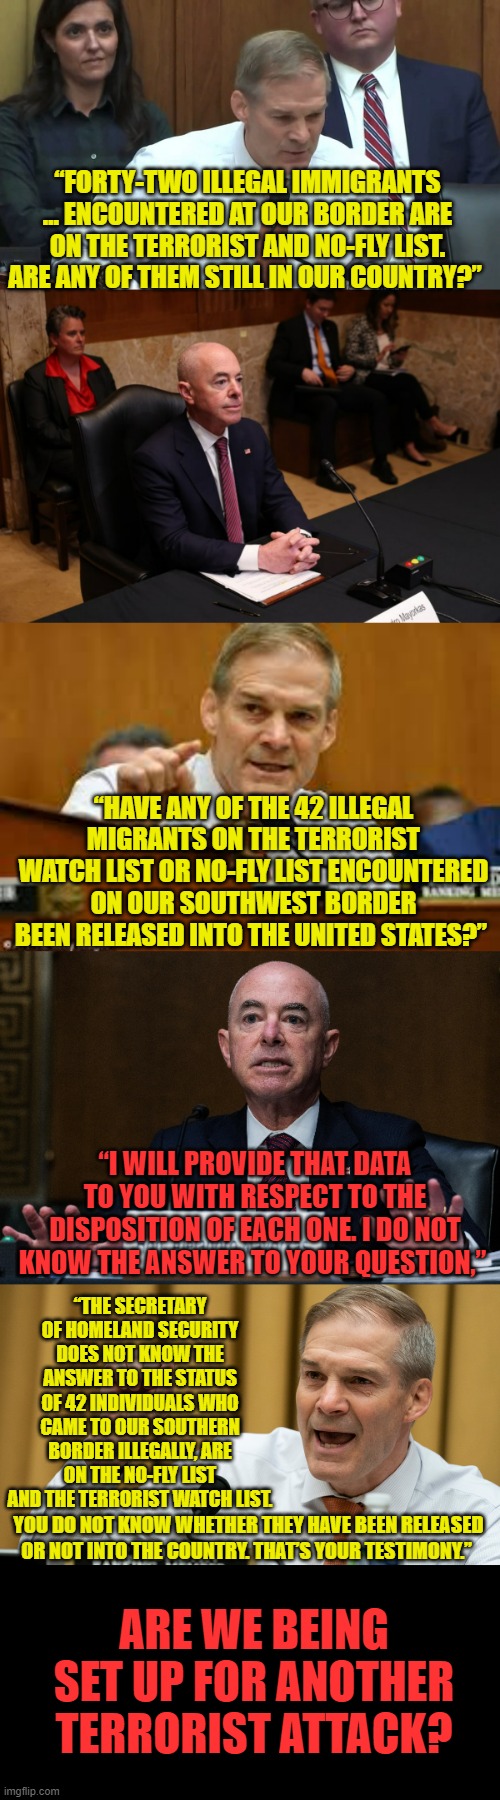 The Real Question... | “FORTY-TWO ILLEGAL IMMIGRANTS … ENCOUNTERED AT OUR BORDER ARE ON THE TERRORIST AND NO-FLY LIST. ARE ANY OF THEM STILL IN OUR COUNTRY?”; “HAVE ANY OF THE 42 ILLEGAL MIGRANTS ON THE TERRORIST WATCH LIST OR NO-FLY LIST ENCOUNTERED ON OUR SOUTHWEST BORDER BEEN RELEASED INTO THE UNITED STATES?”; “I WILL PROVIDE THAT DATA TO YOU WITH RESPECT TO THE DISPOSITION OF EACH ONE. I DO NOT KNOW THE ANSWER TO YOUR QUESTION,”; “THE SECRETARY OF HOMELAND SECURITY DOES NOT KNOW THE ANSWER TO THE STATUS OF 42 INDIVIDUALS WHO CAME TO OUR SOUTHERN BORDER ILLEGALLY, ARE ON THE NO-FLY LIST AND THE TERRORIST WATCH LIST. YOU DO NOT KNOW WHETHER THEY HAVE BEEN RELEASED OR NOT INTO THE COUNTRY. THAT’S YOUR TESTIMONY.”; ARE WE BEING SET UP FOR ANOTHER TERRORIST ATTACK? | image tagged in memes,politics,jordan,mayorkas,terrorism,set up | made w/ Imgflip meme maker